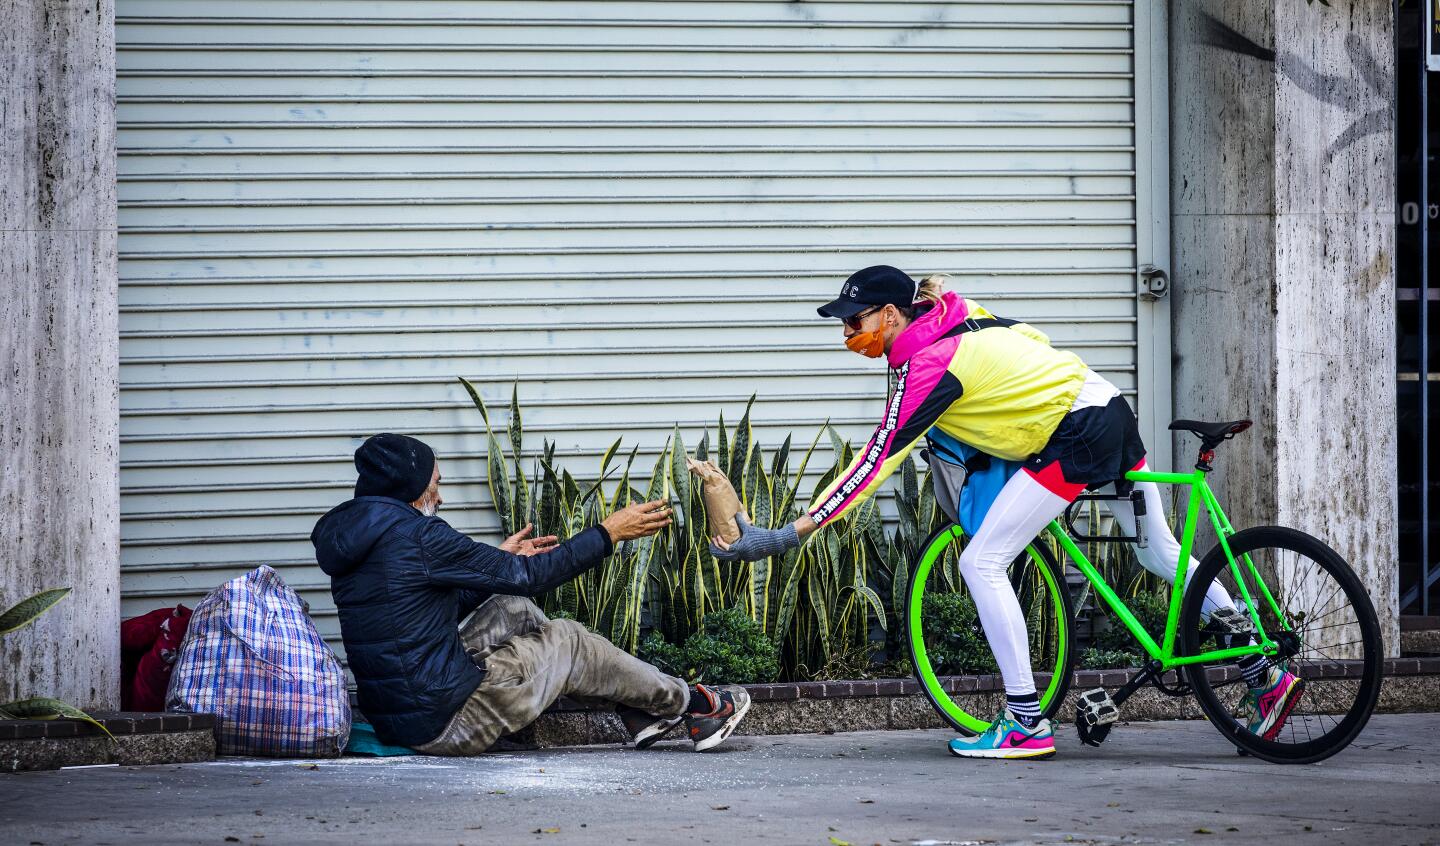 Bicycle Meals volunteer Alex Gilbertson delivers a bagged meal to a homeless man on Wilshire Boulevard in Koreatown.